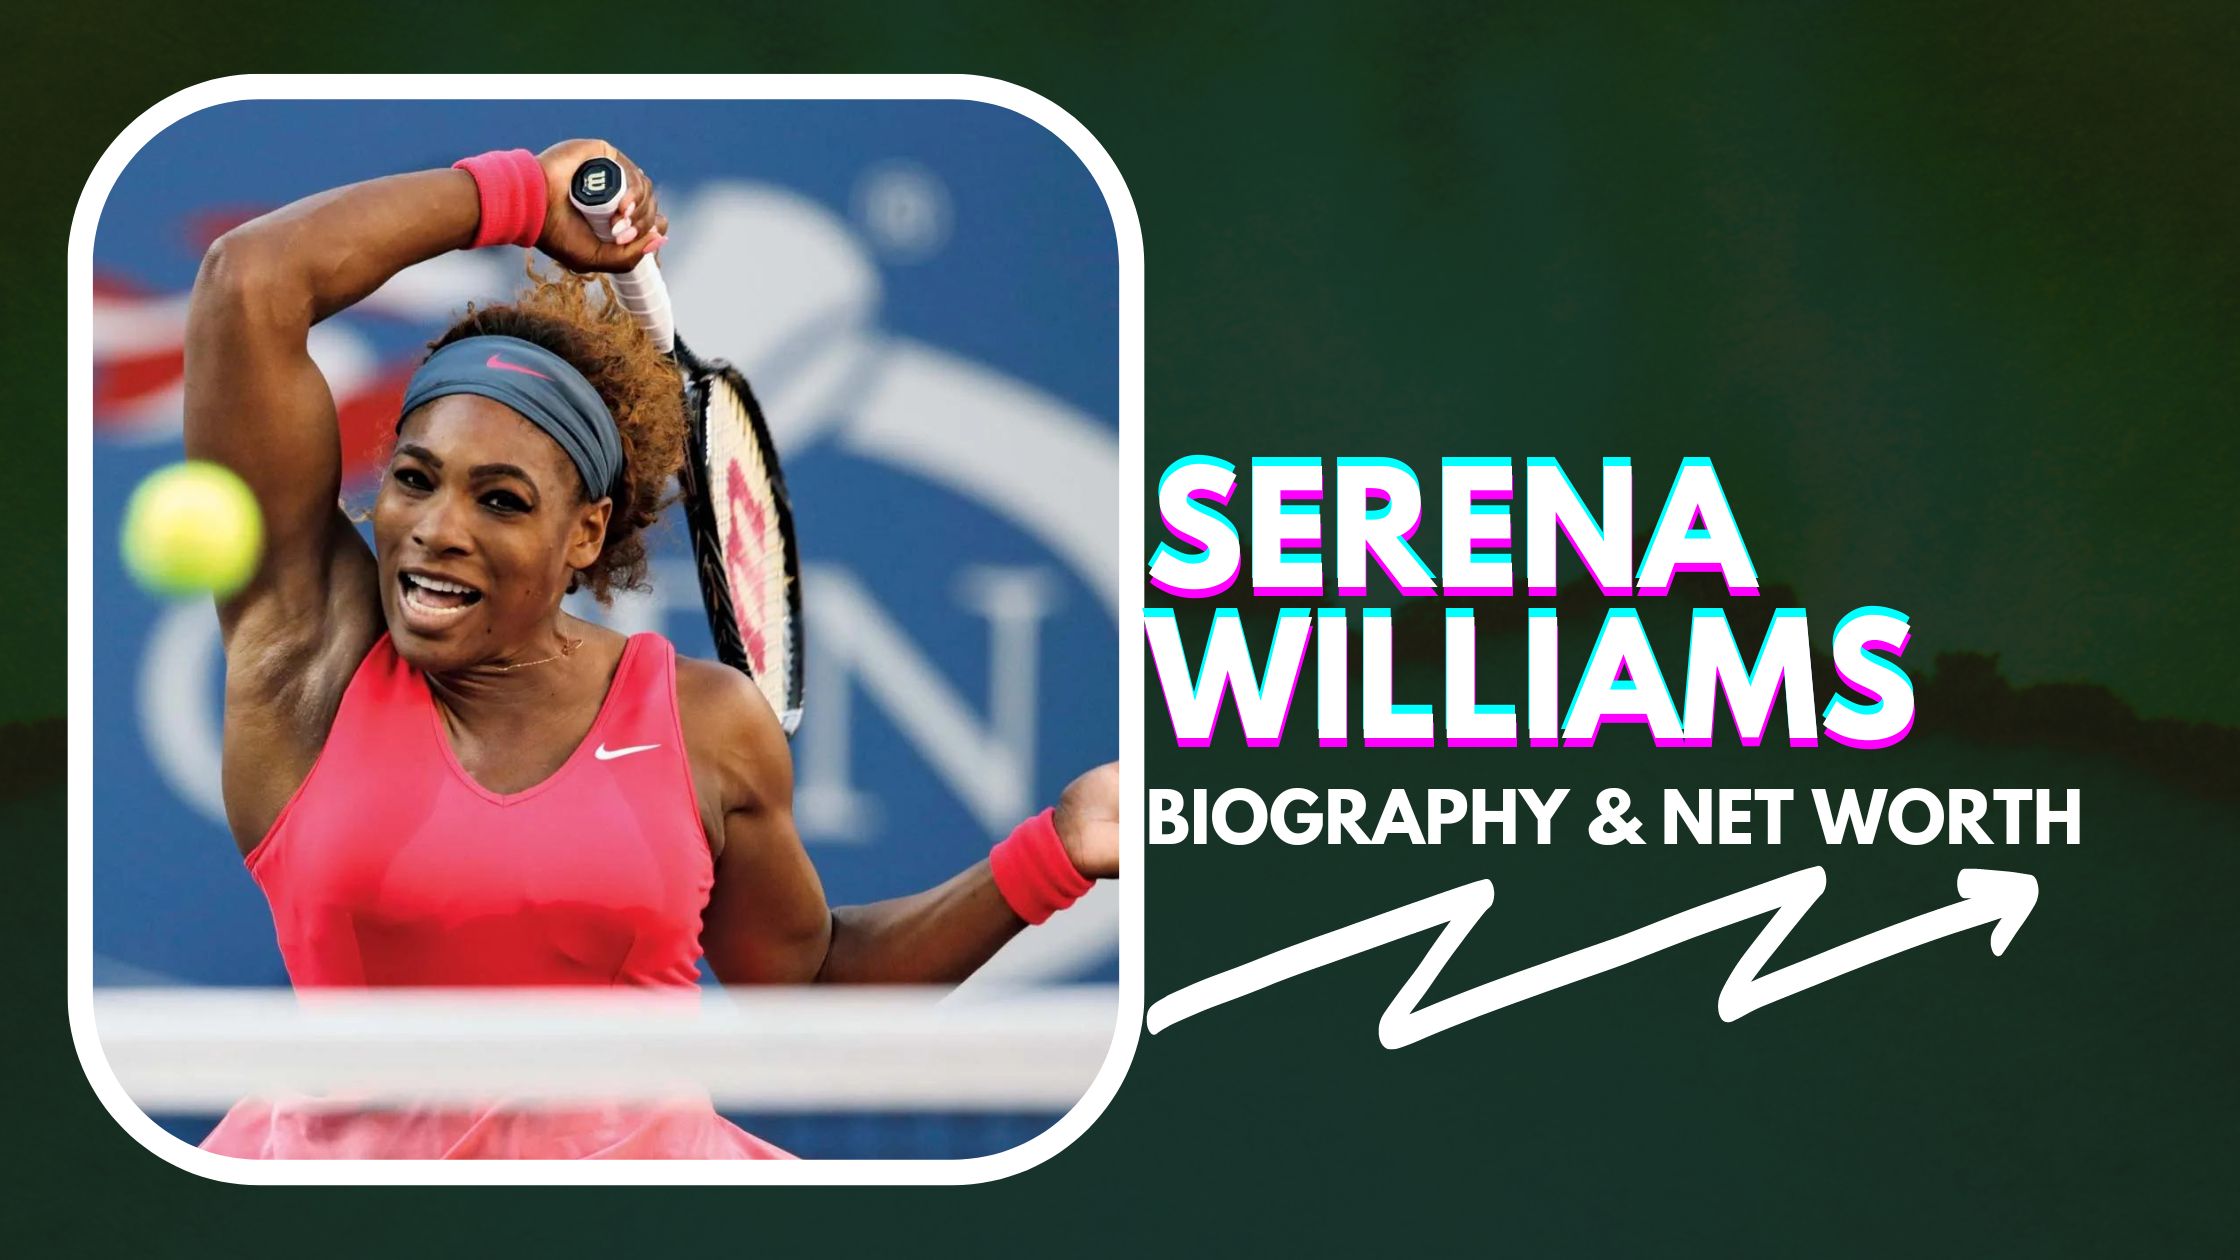 Serena Williams Net Worth and Biography